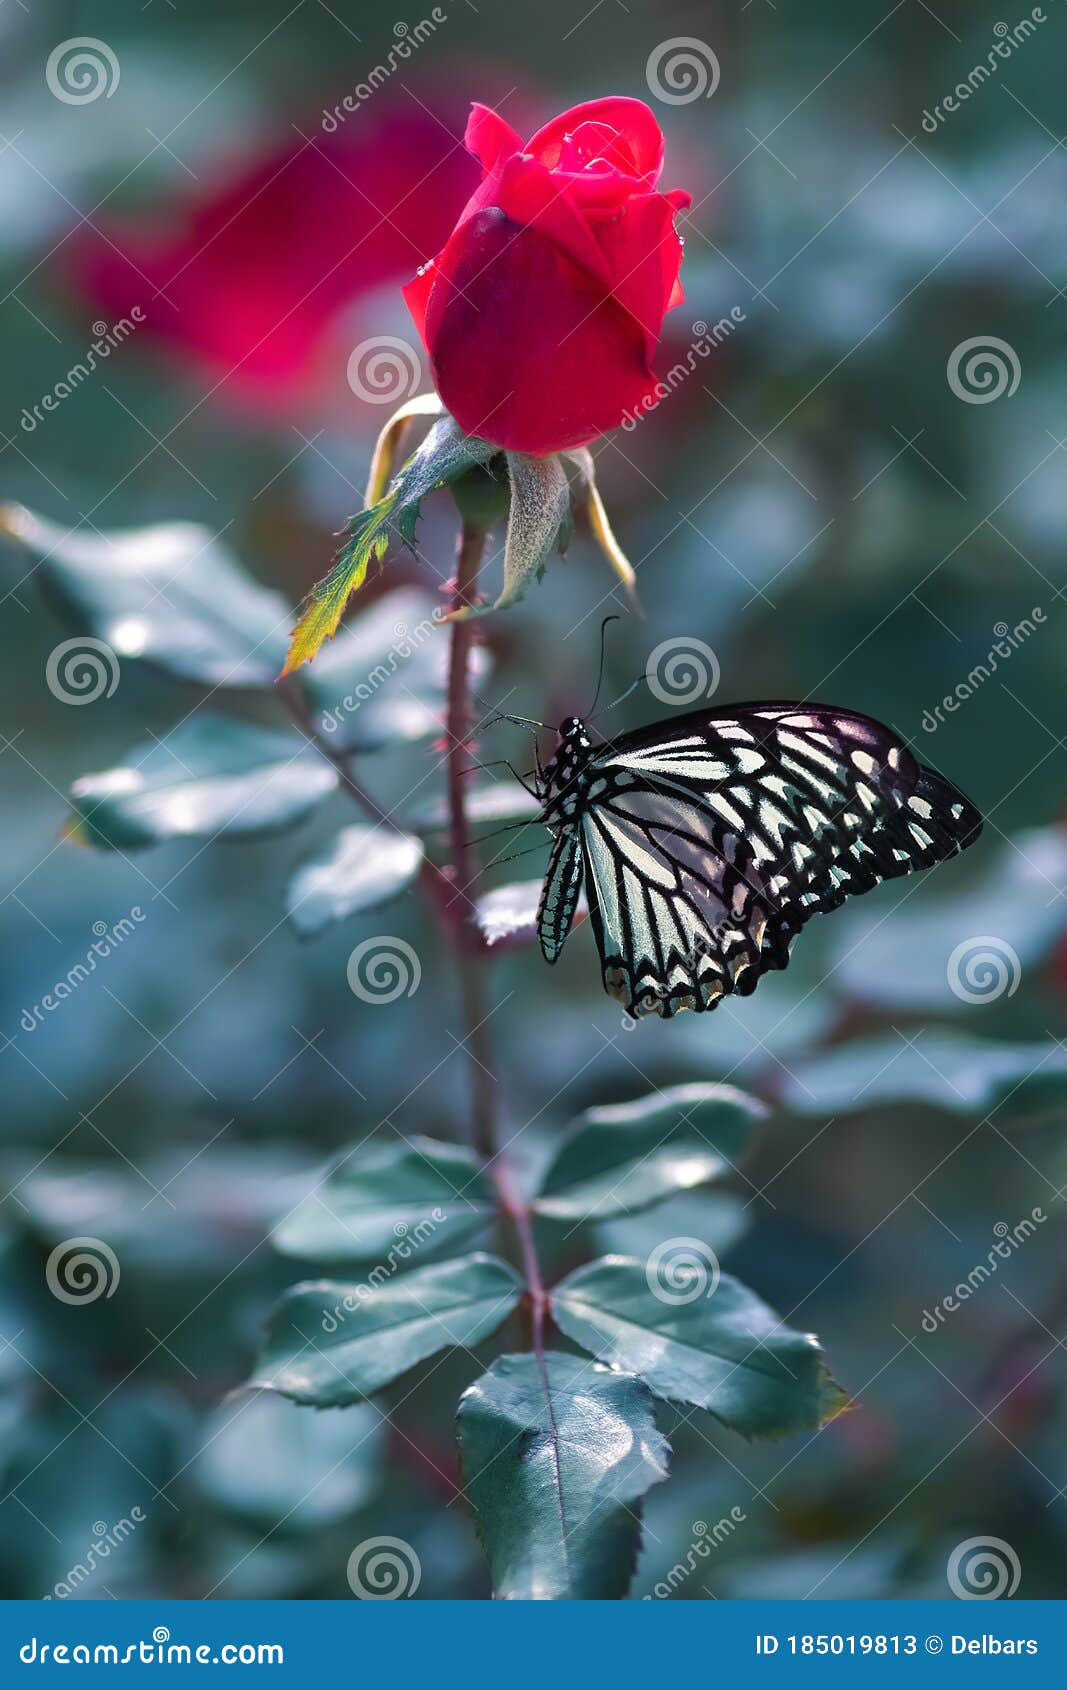 Beautiful Red Rose and Butterfly in Summer Garden. Stock Image ...